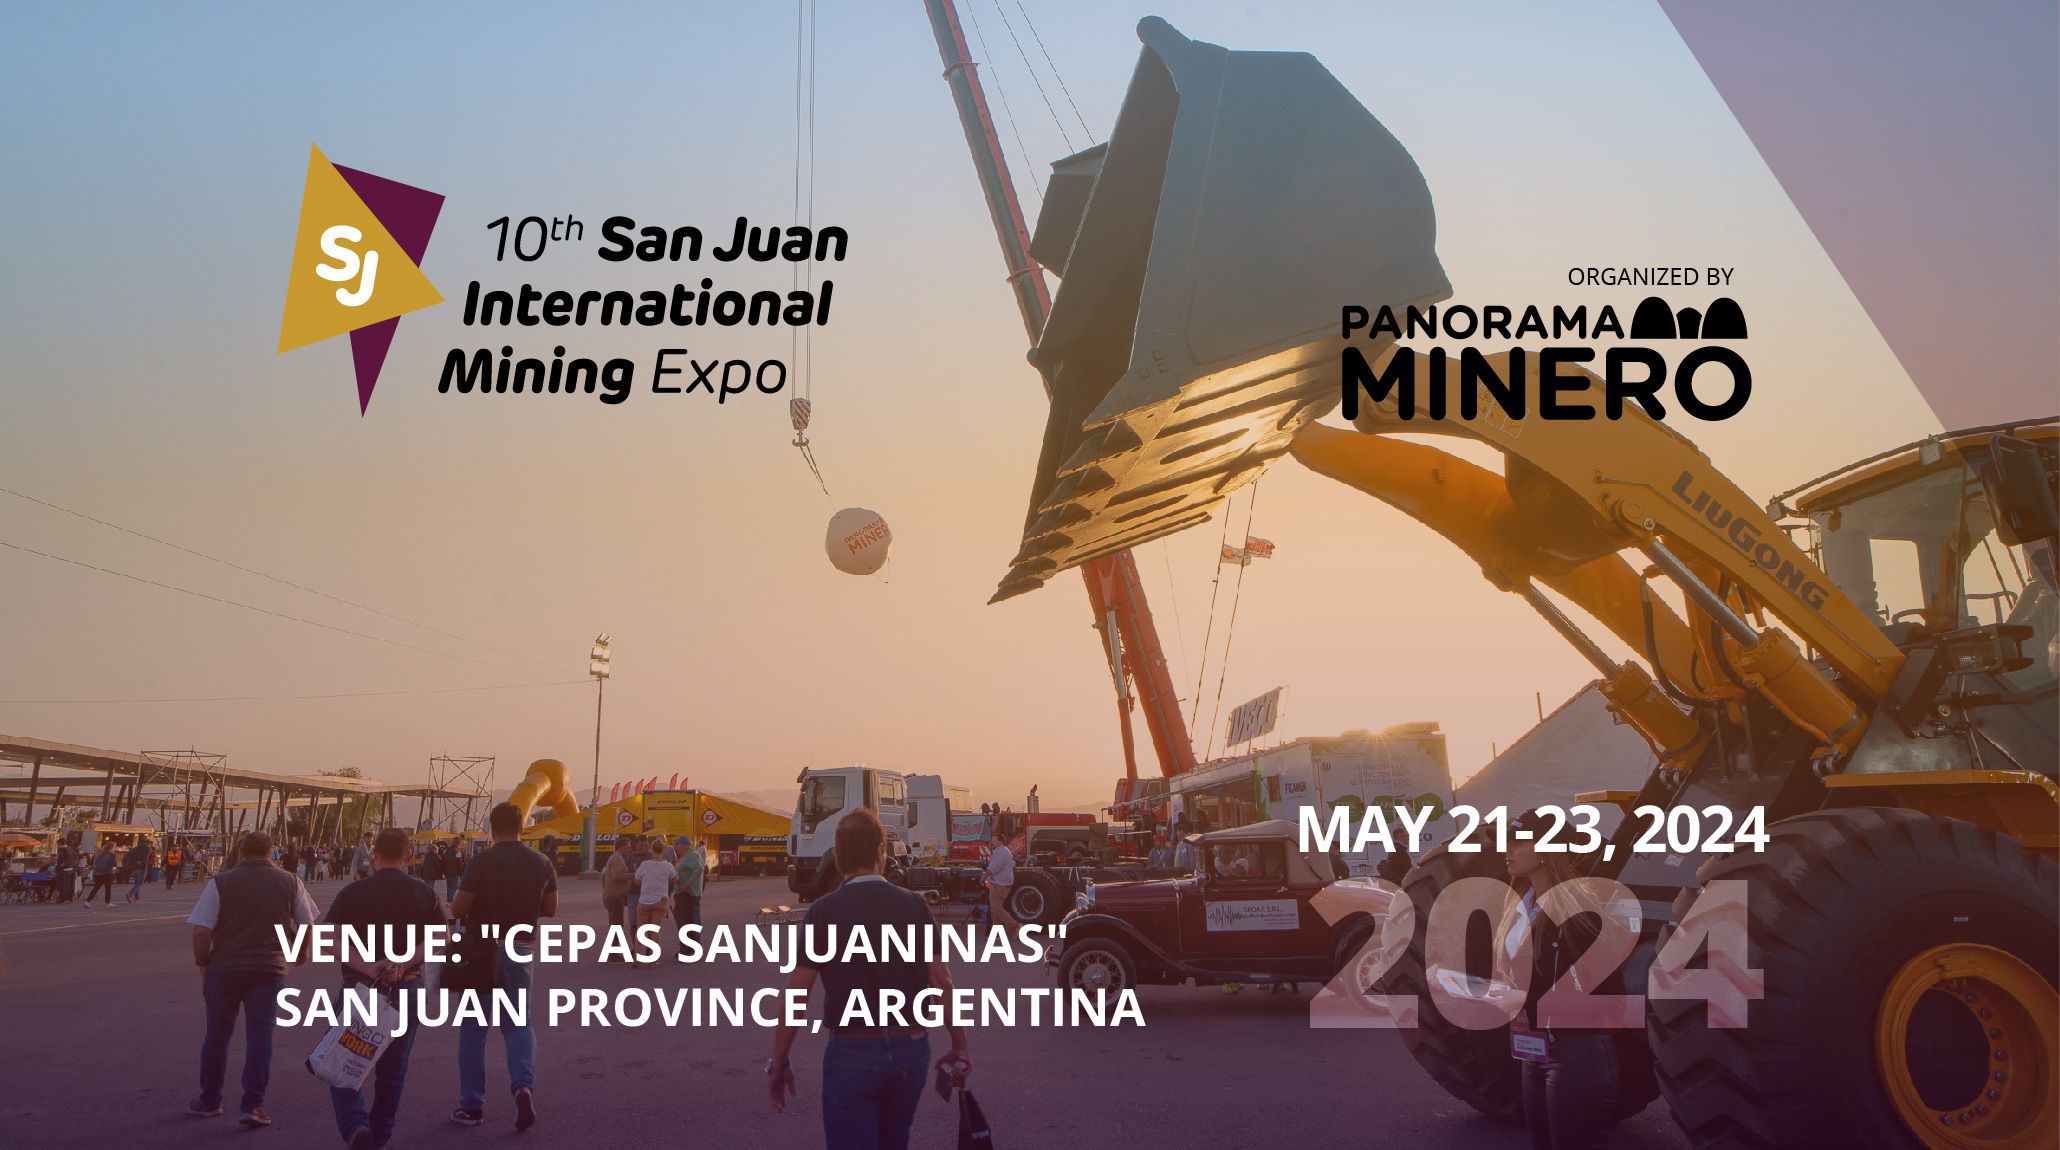 In May, San Juan will serve as the focal point for the Argentine mining industry